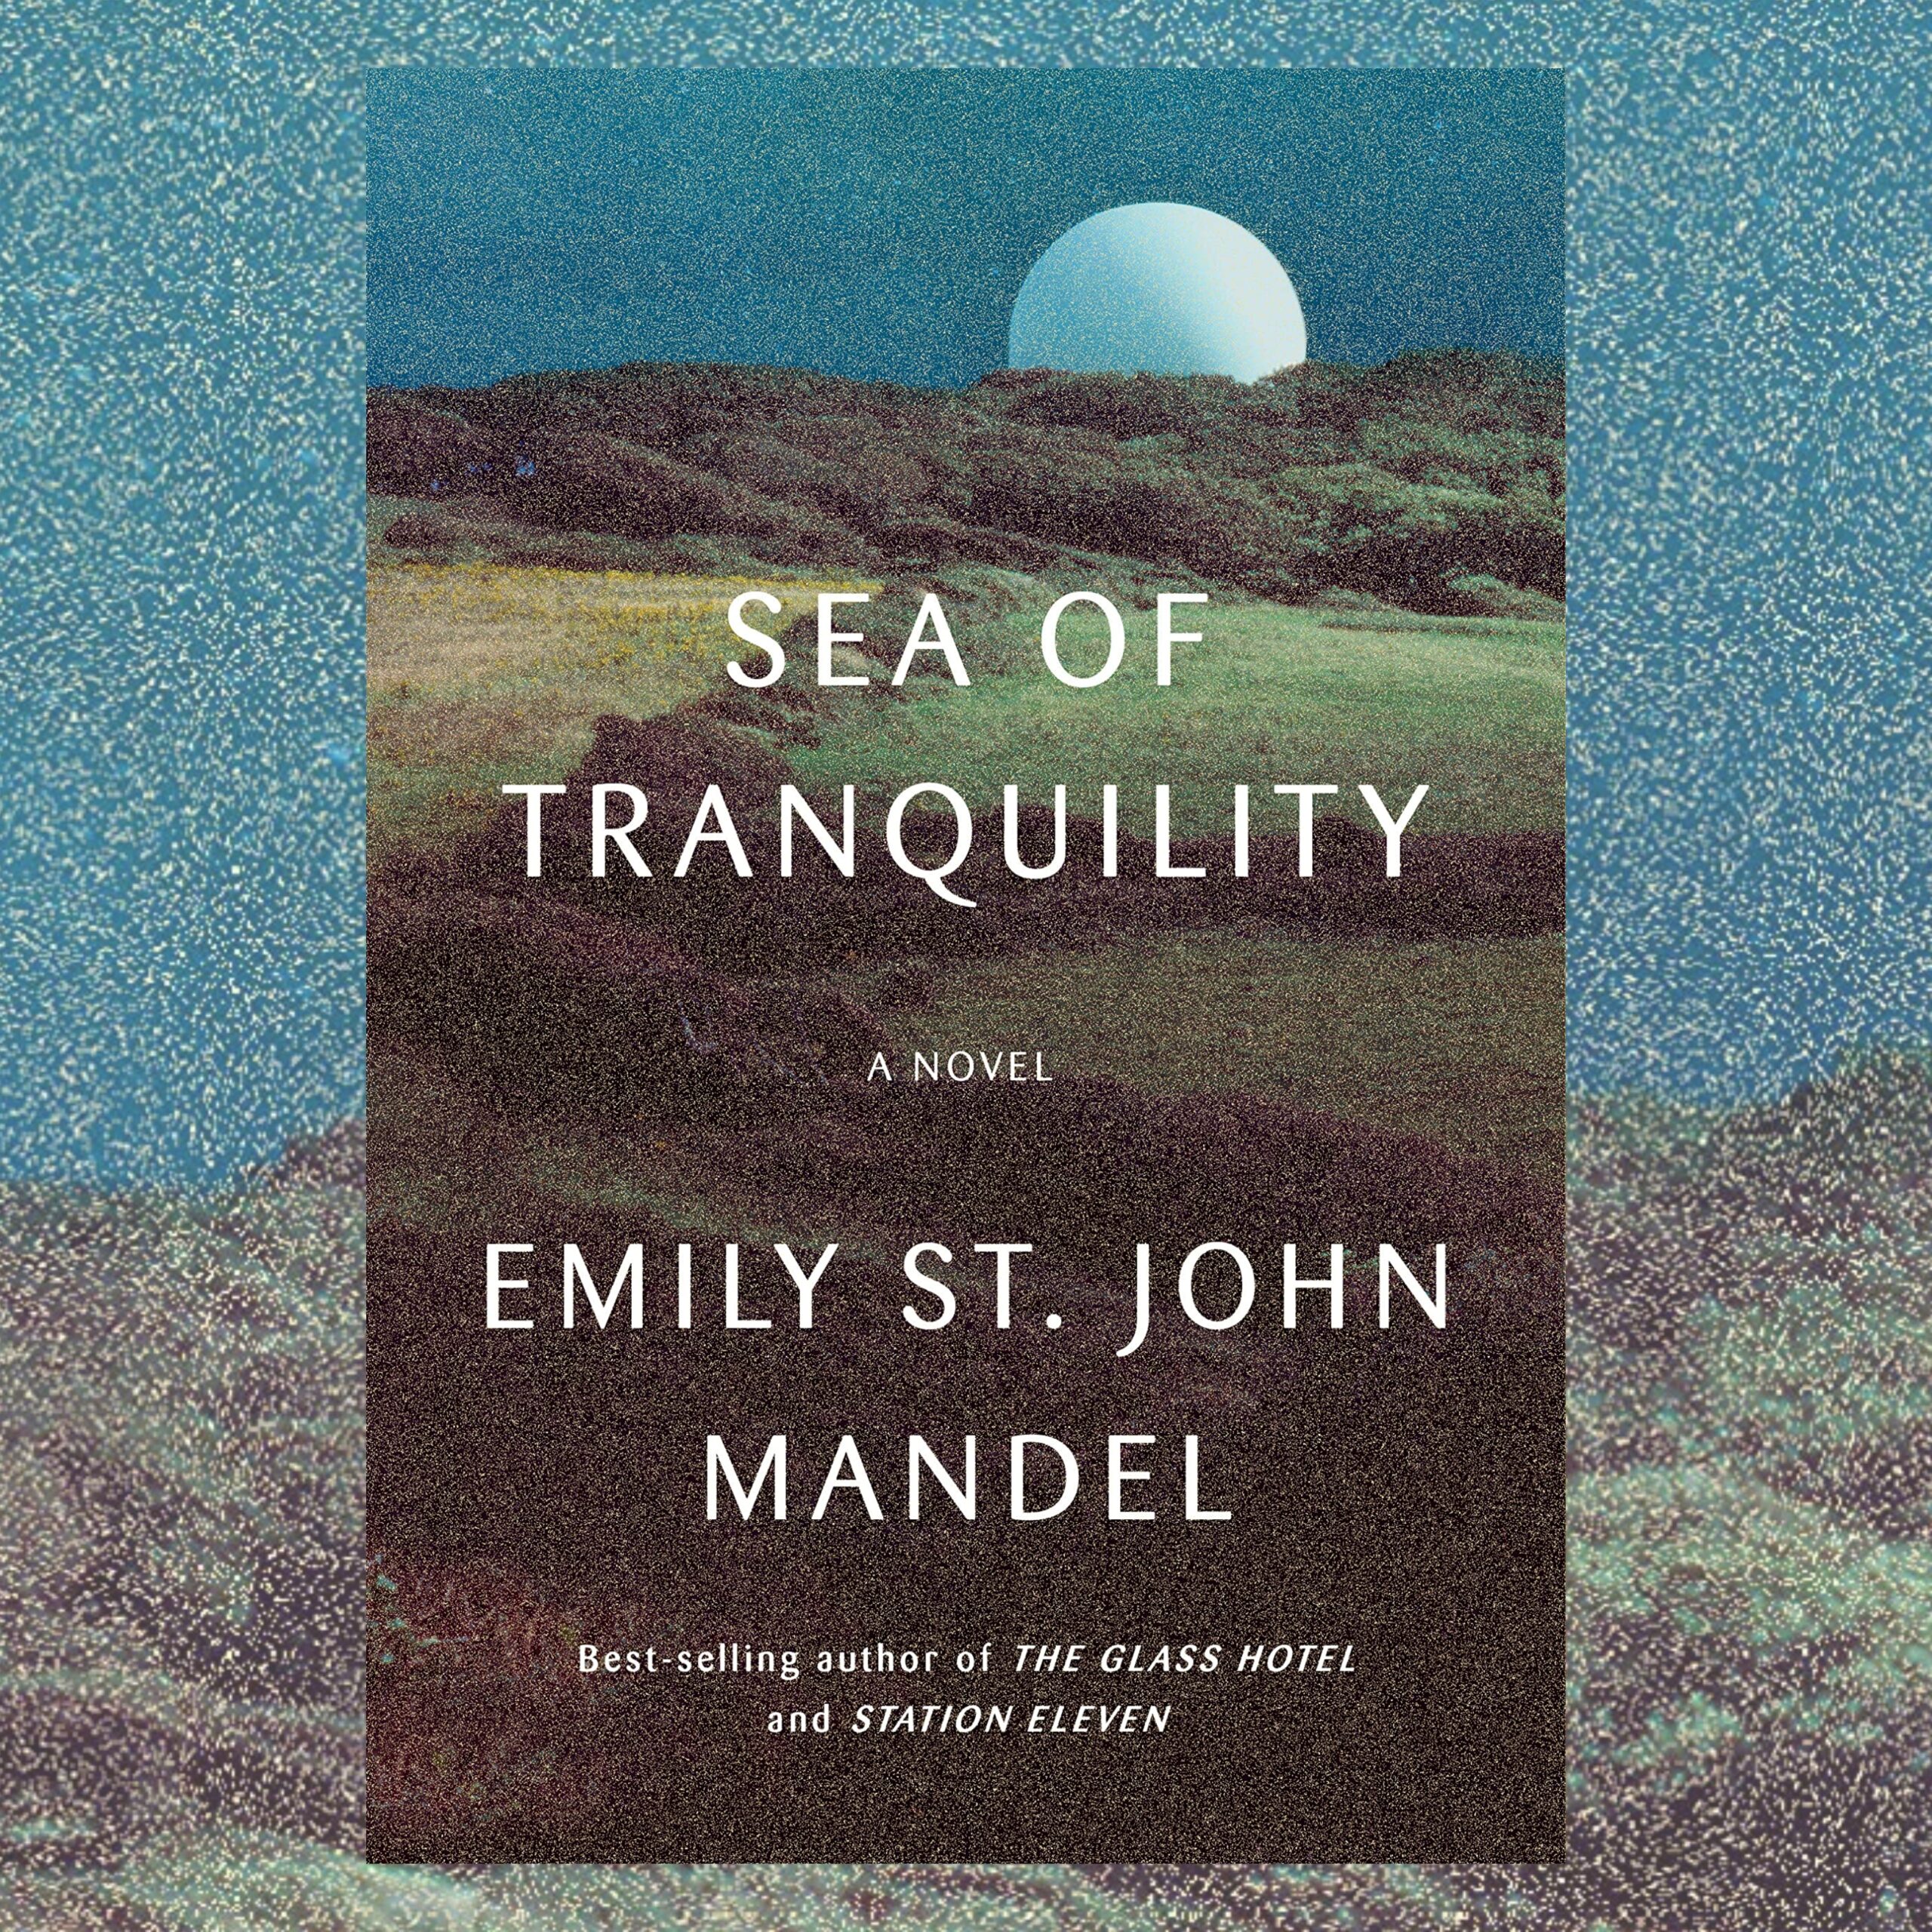 #1767 Emily St. John Mandel “Sea of Tranquility” | The Book Show